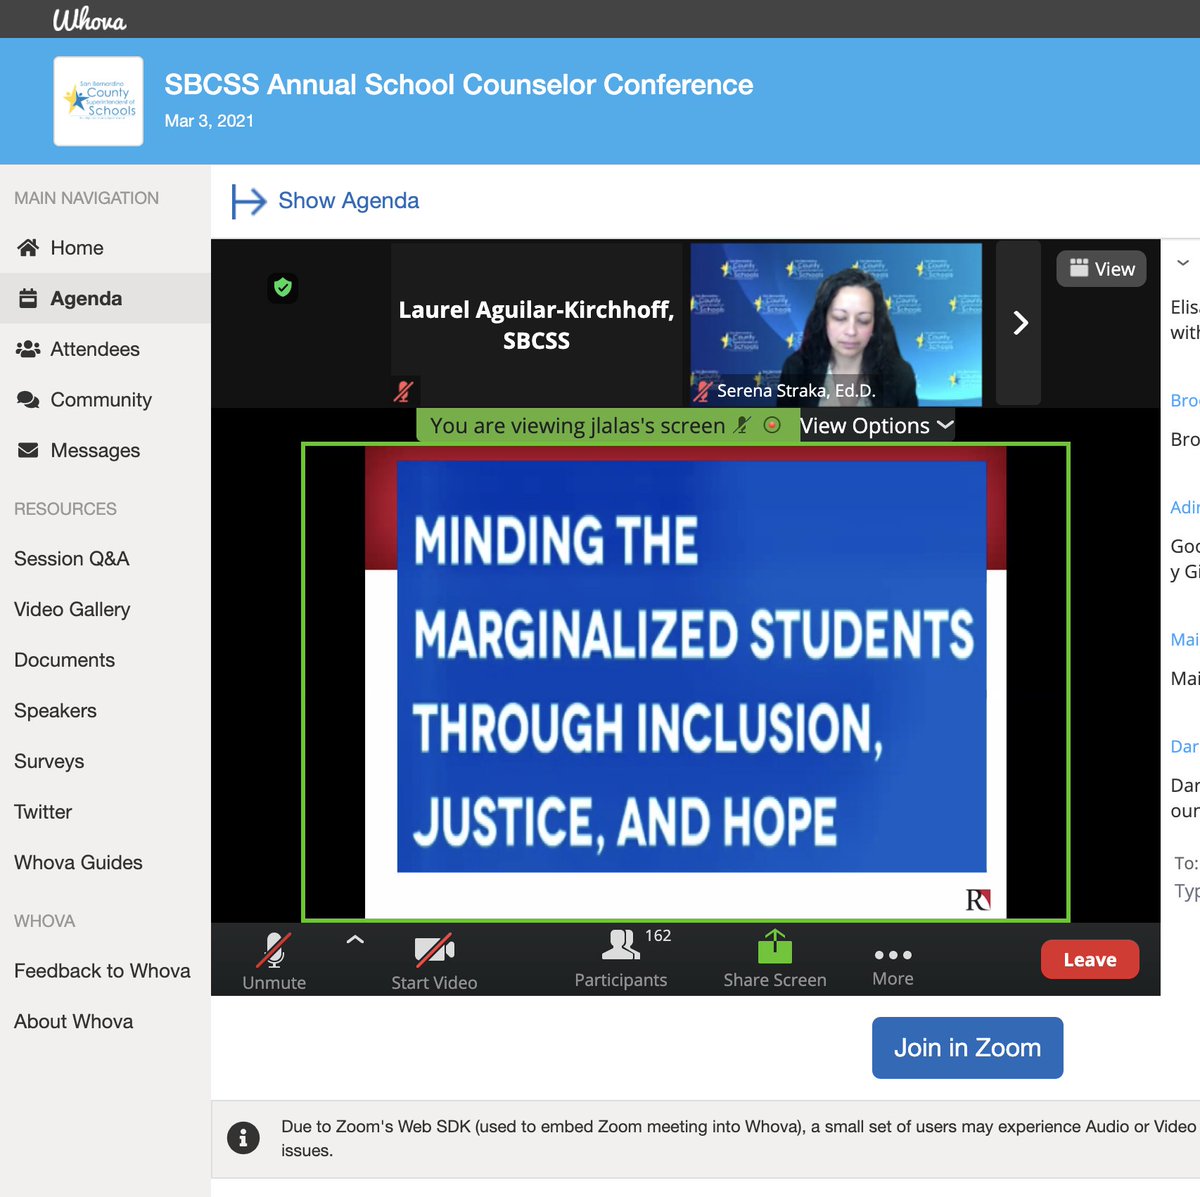 Opening Keynote for the @SBCSS Annual School Counselors Conference from @JoseLalas on 'Minding the Marginalized Student with Inclusion, Justice, and Hope.' I feel honored to present in breakout sessions with @TrPatel20 on #digcit and #csequity. @SBCSS_EdTech @Serena_Straka